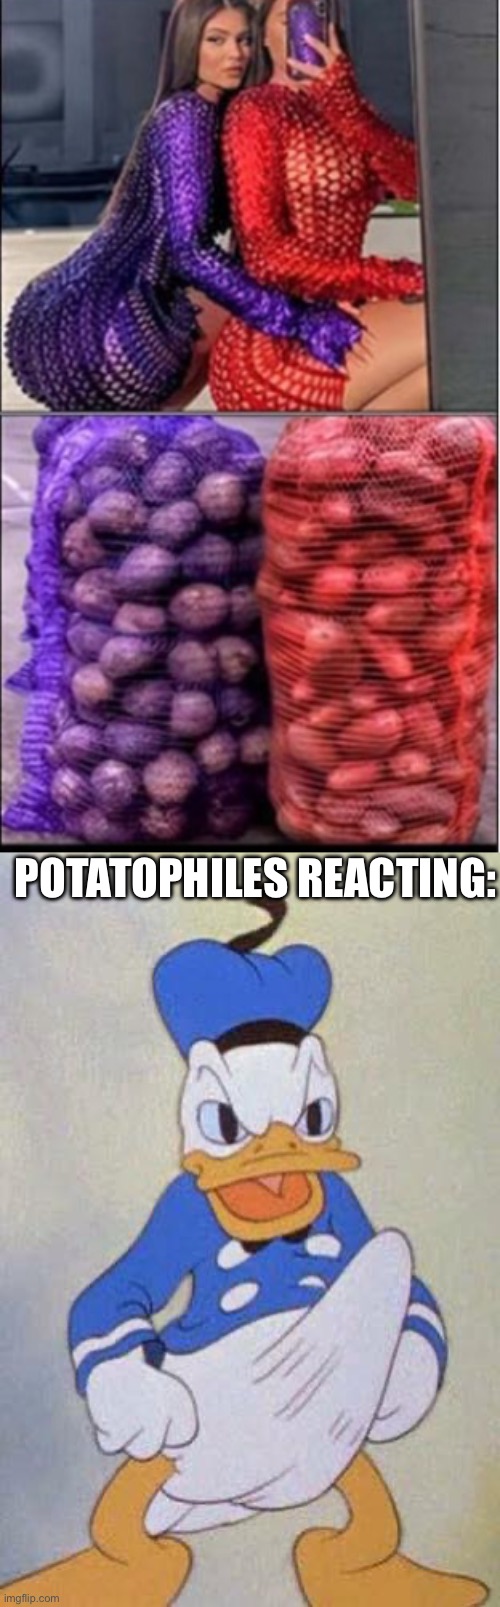 Potatophiles | POTATOPHILES REACTING: | image tagged in horny donald duck,potato | made w/ Imgflip meme maker